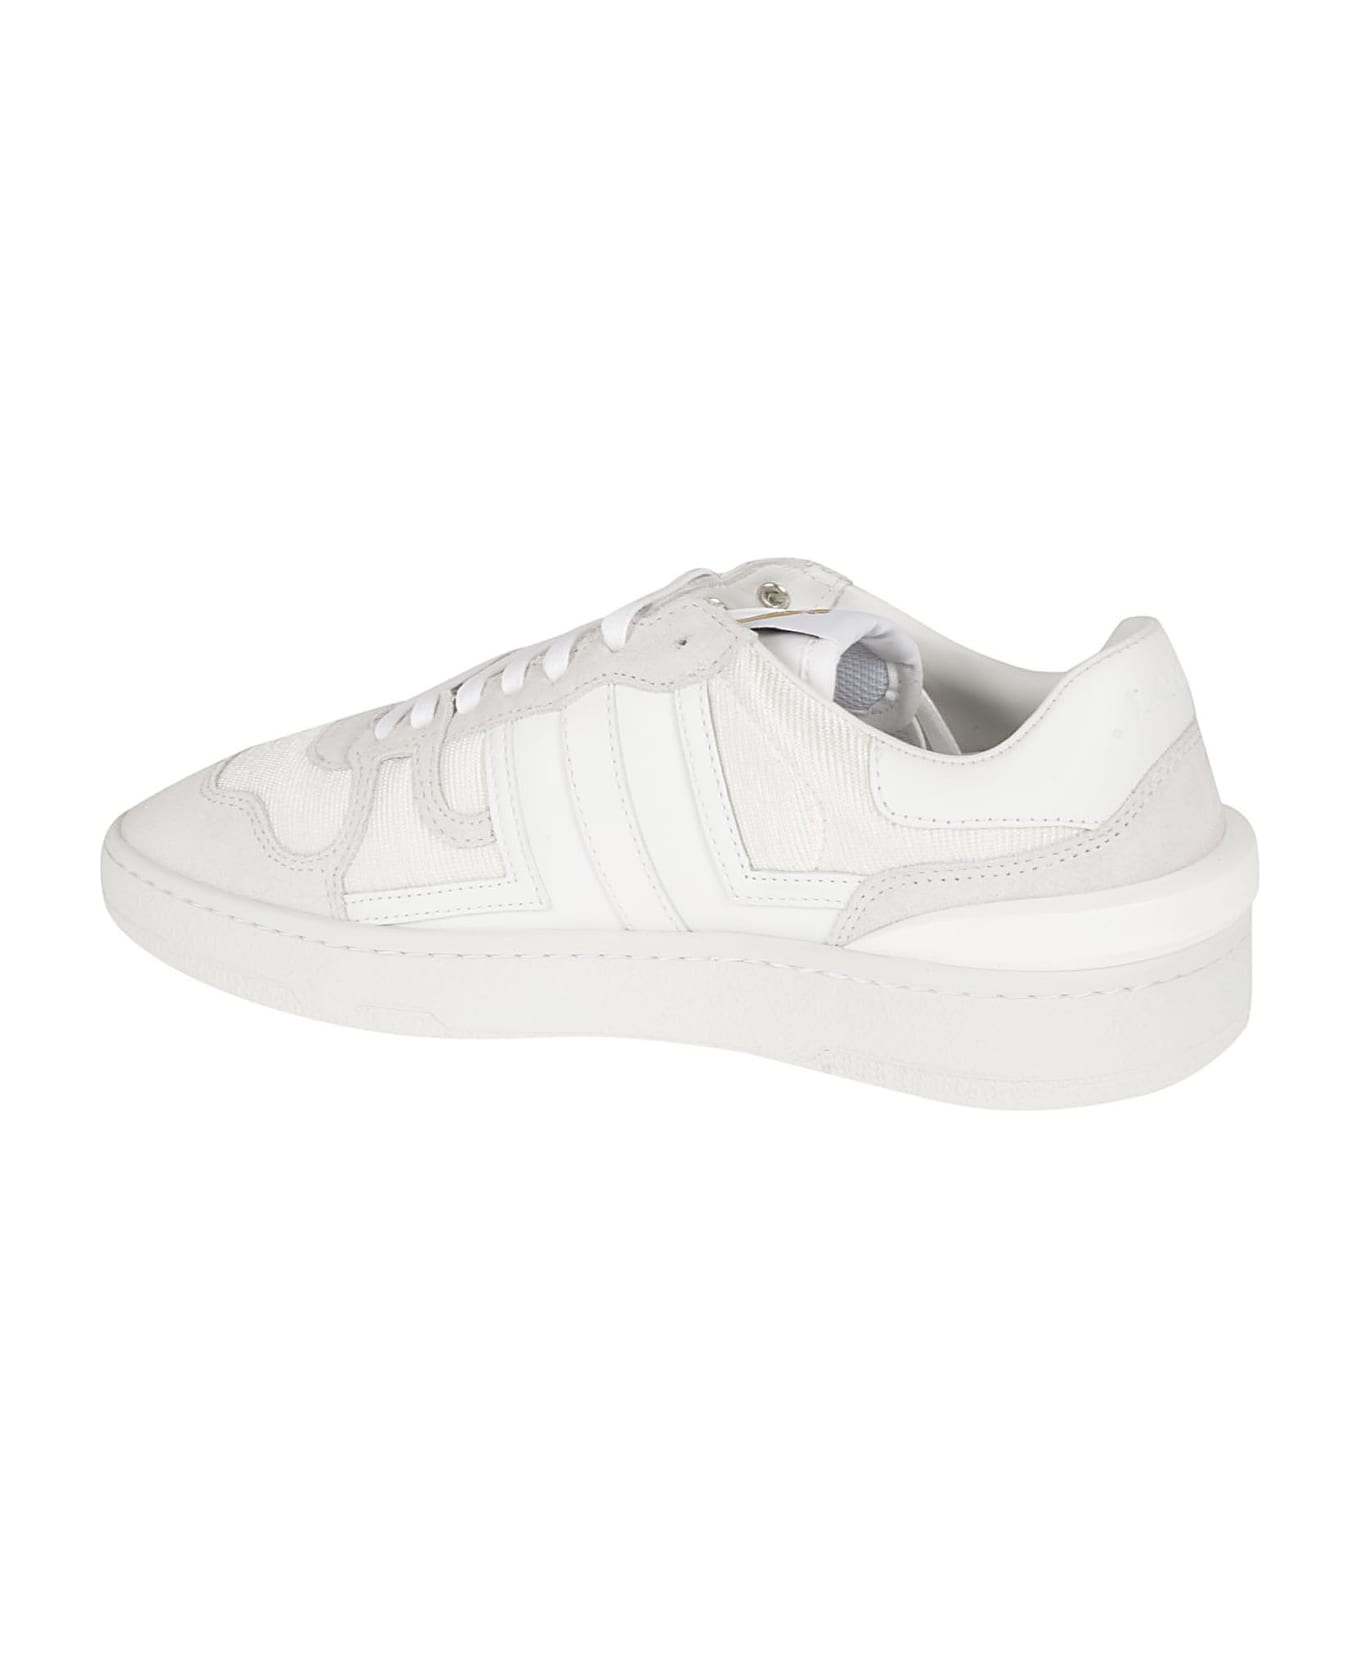 Lanvin Clay Low Top Sneakers - White